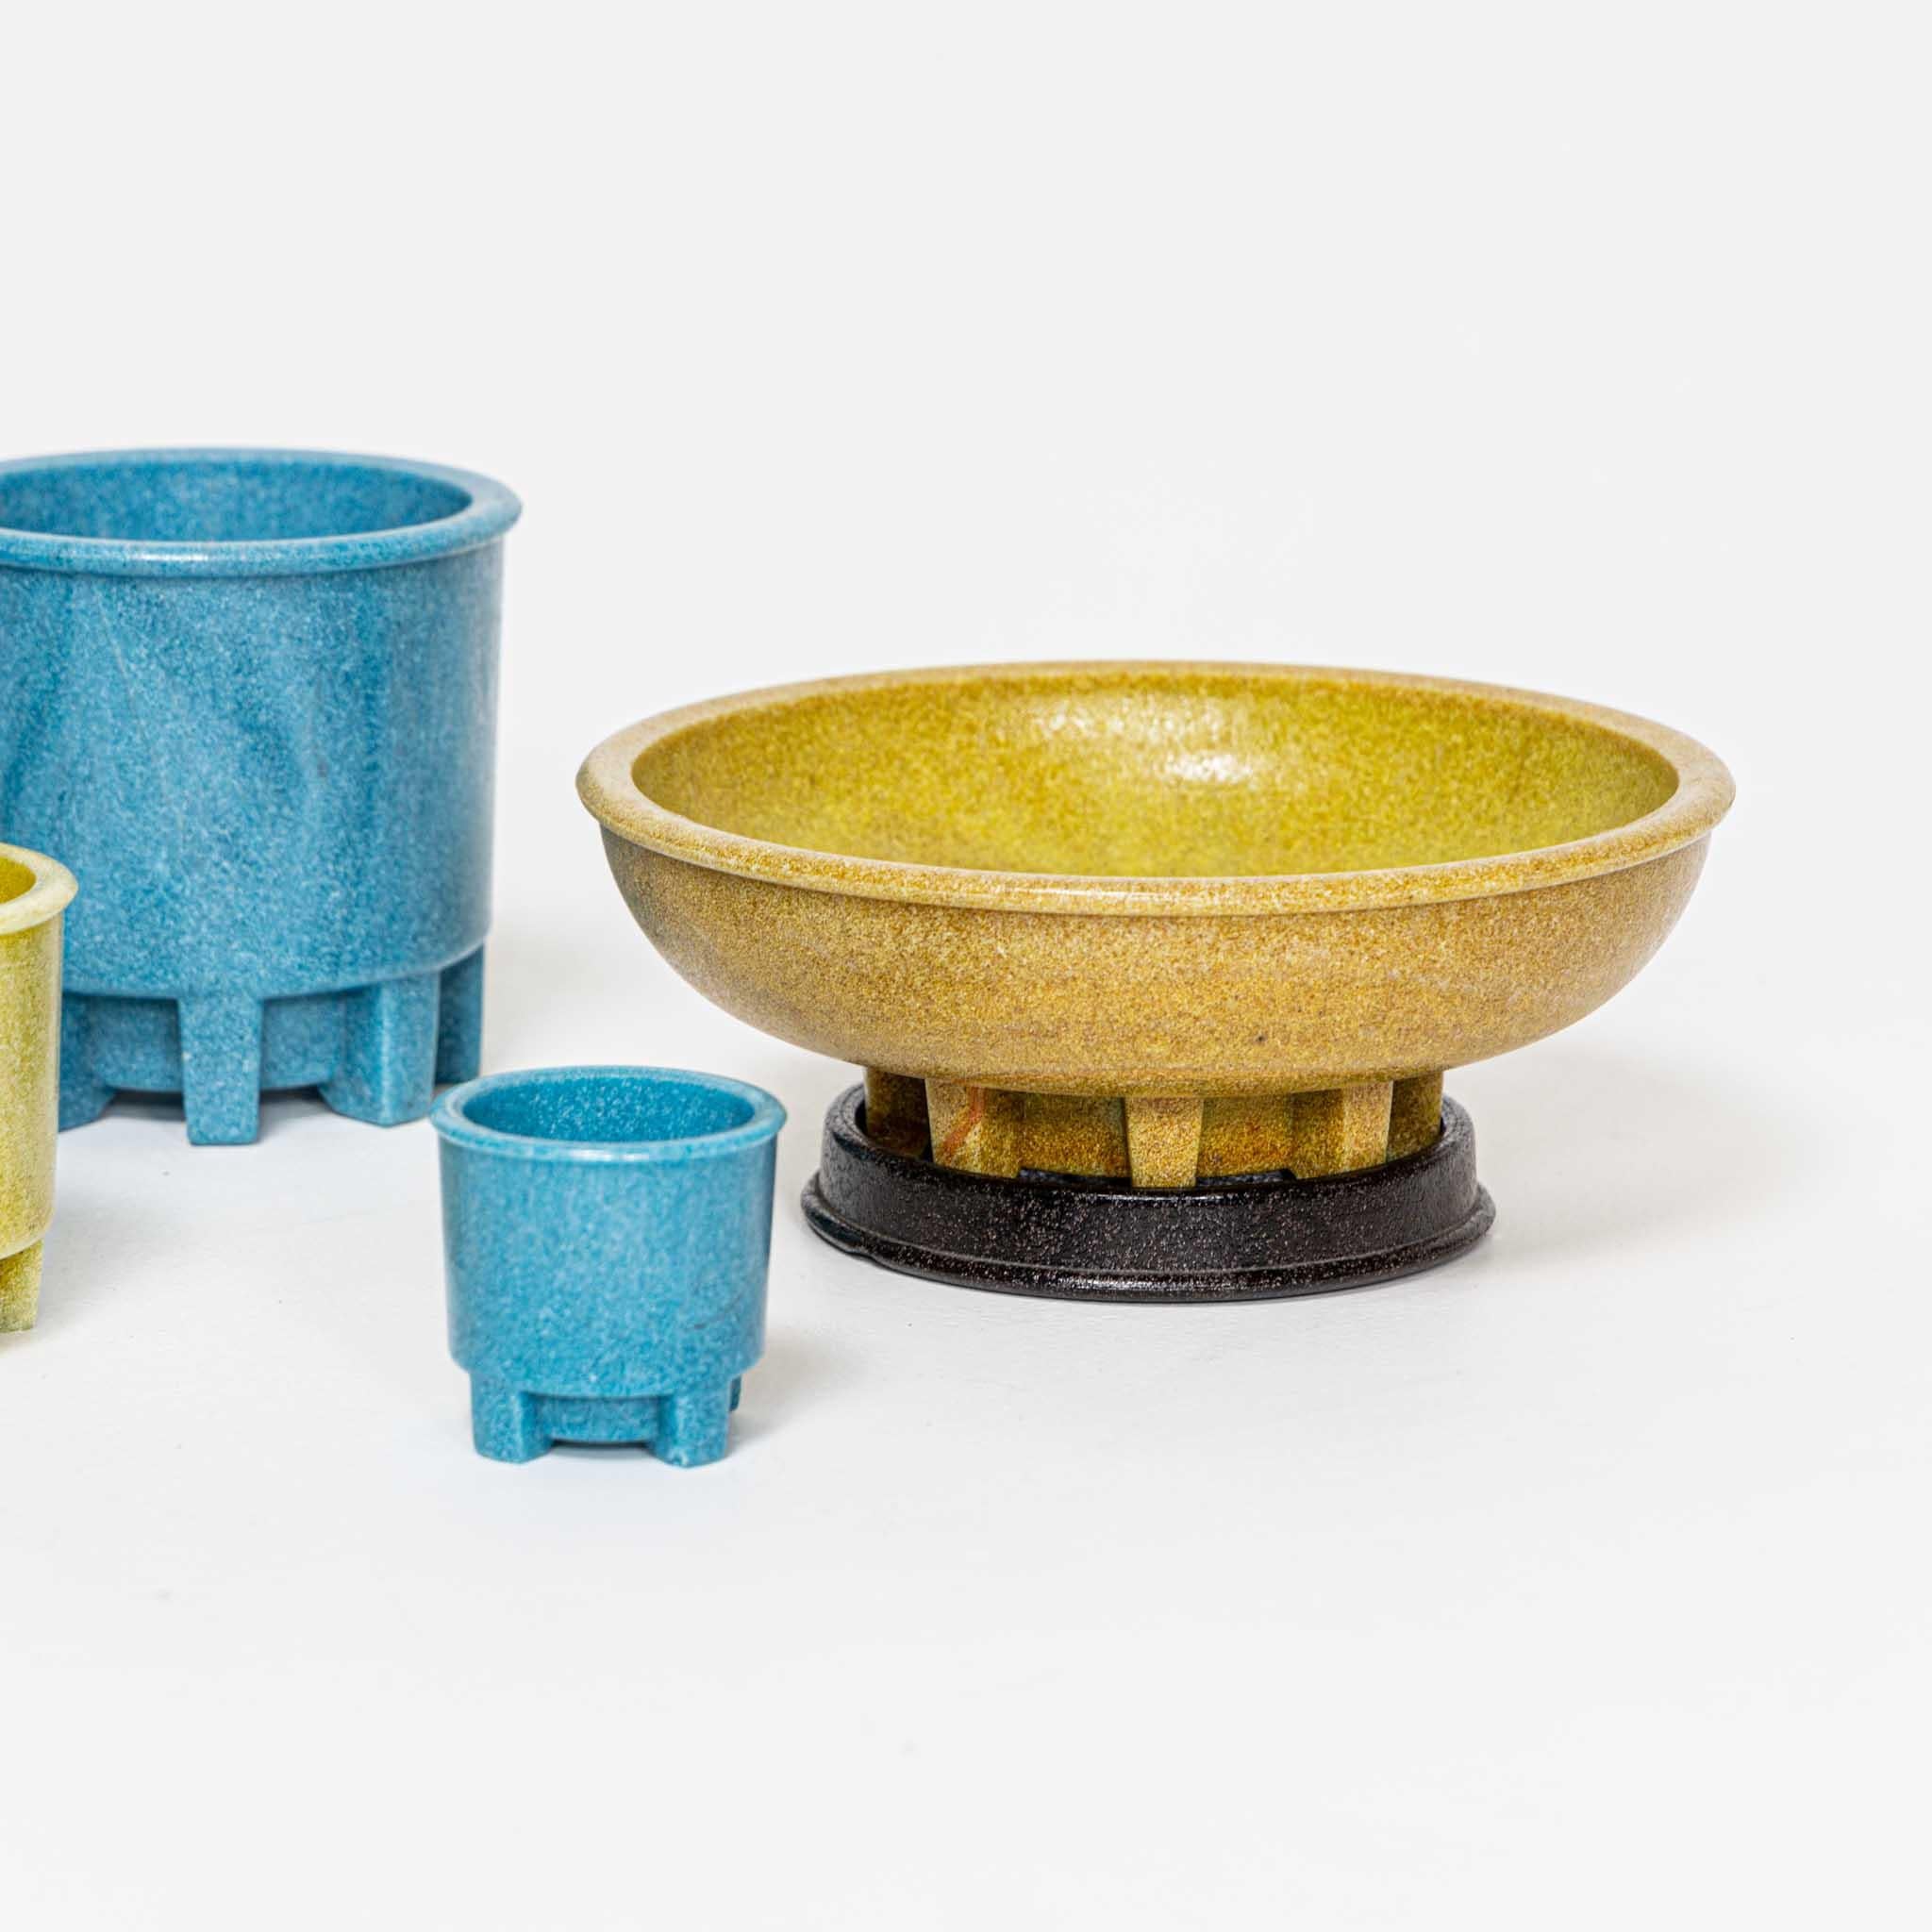 Set of five flower pots in blue and yellow and two black coasters made of Graniver glass, specially designed for cacti. Dimensions: 12 x Ø13 cm, 9 x Ø22 cm, 7 x Ø18 cm, 8.5 x Ø9 cm, 6 x Ø6 cm.